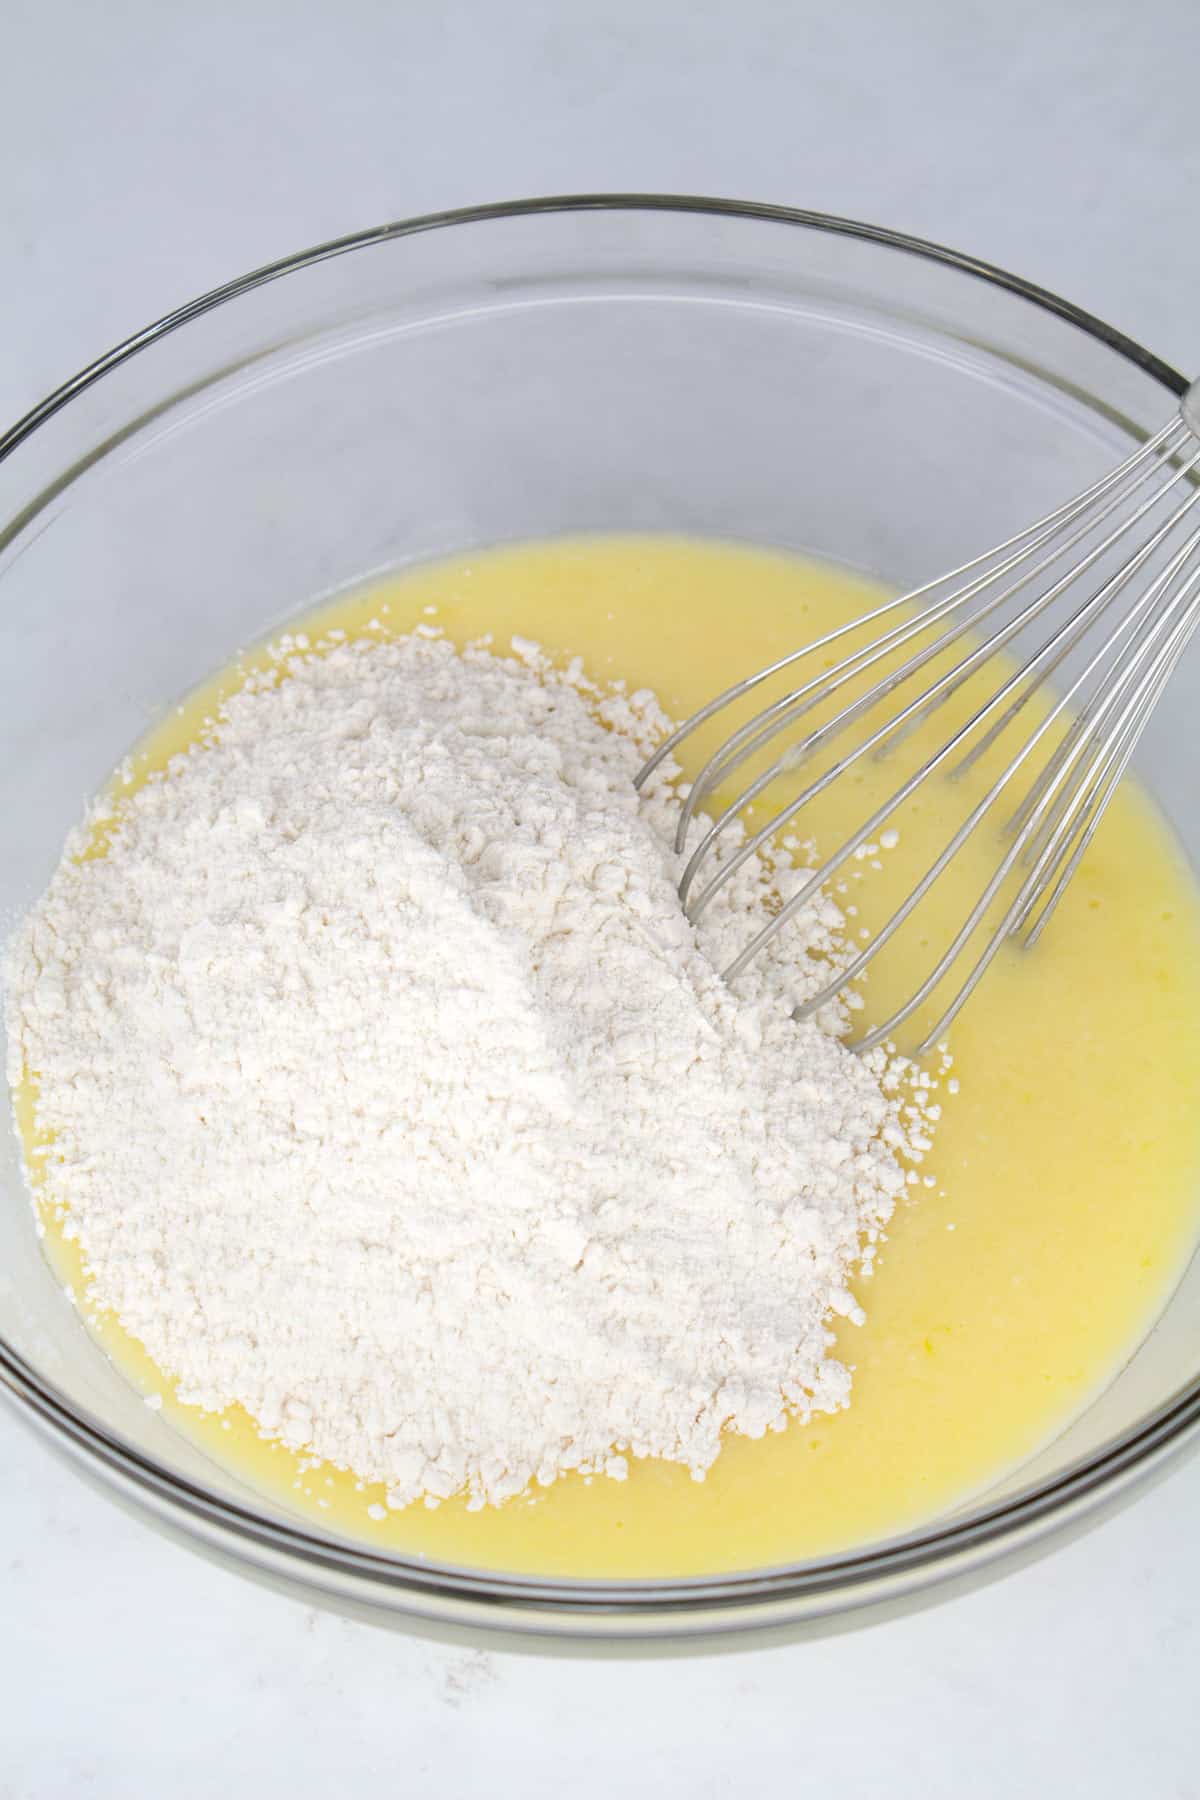 Flour mixture added on top of wet ingredients in a glass bowl with a whisk sitting in the back of the bowl.